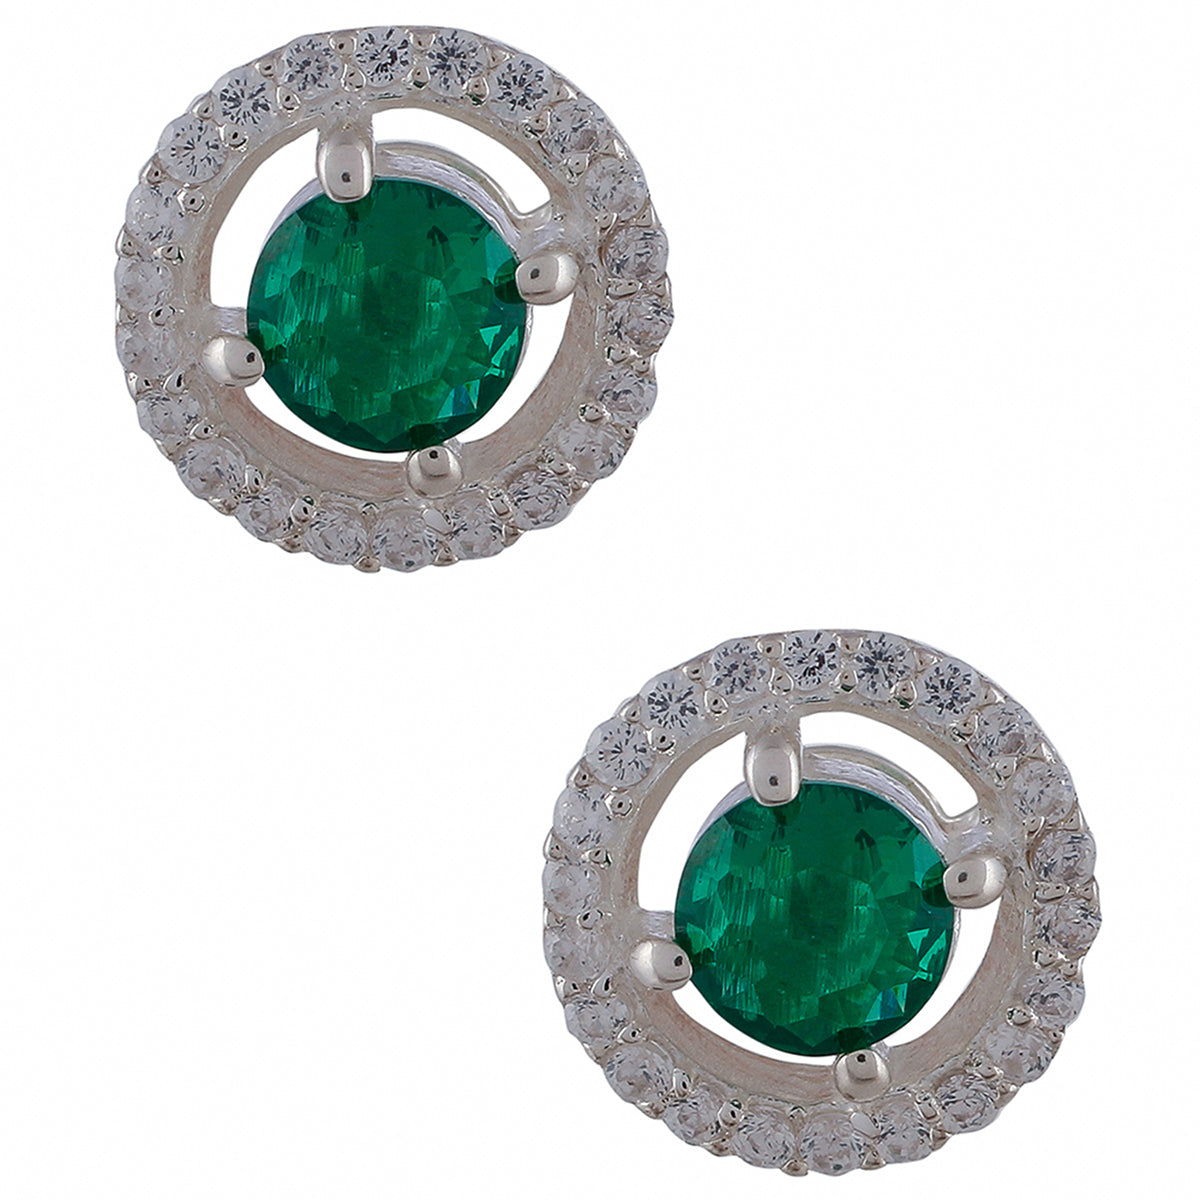 925 Sterling Silver Round Shaped Stud Earrings Made With Green Stone